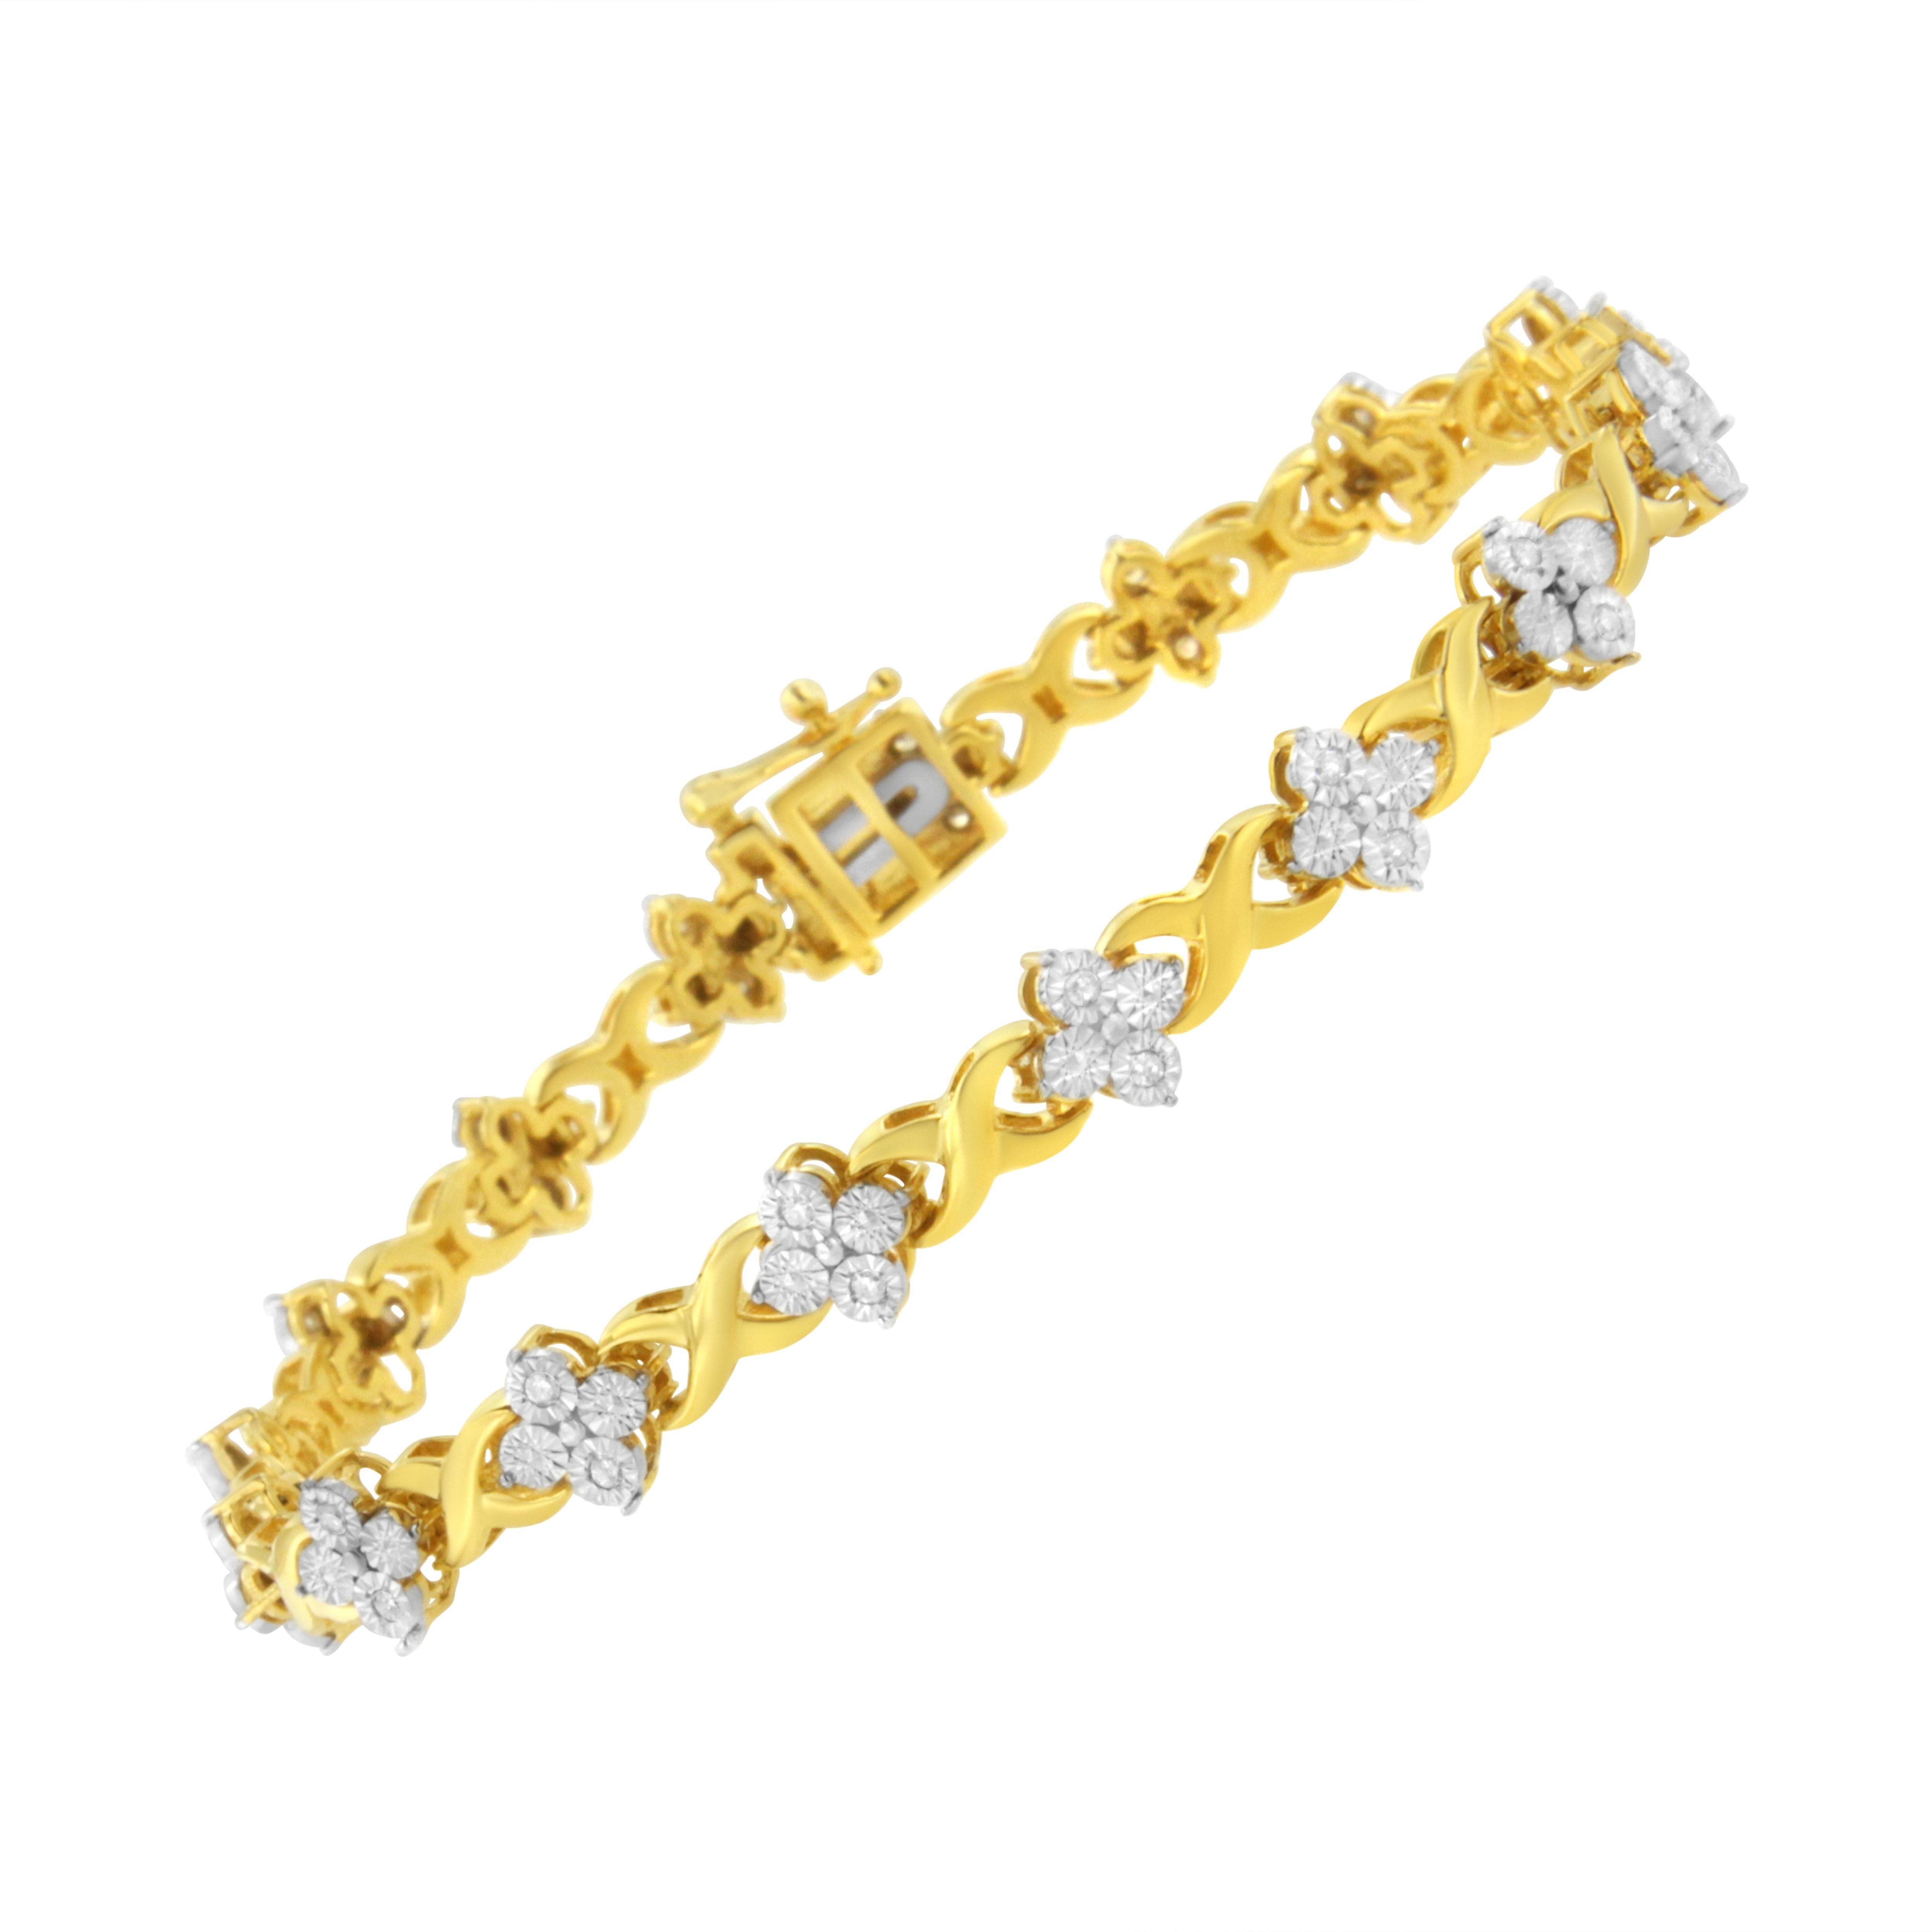 This lovely diamond bracelet displays glittering round cut diamonds mounted in a floral inspired shape that link together by polished yellow gold X's. Crafted from 10k yellow gold plated sterling silver, this bracelet features 1/4ct TDW of natural